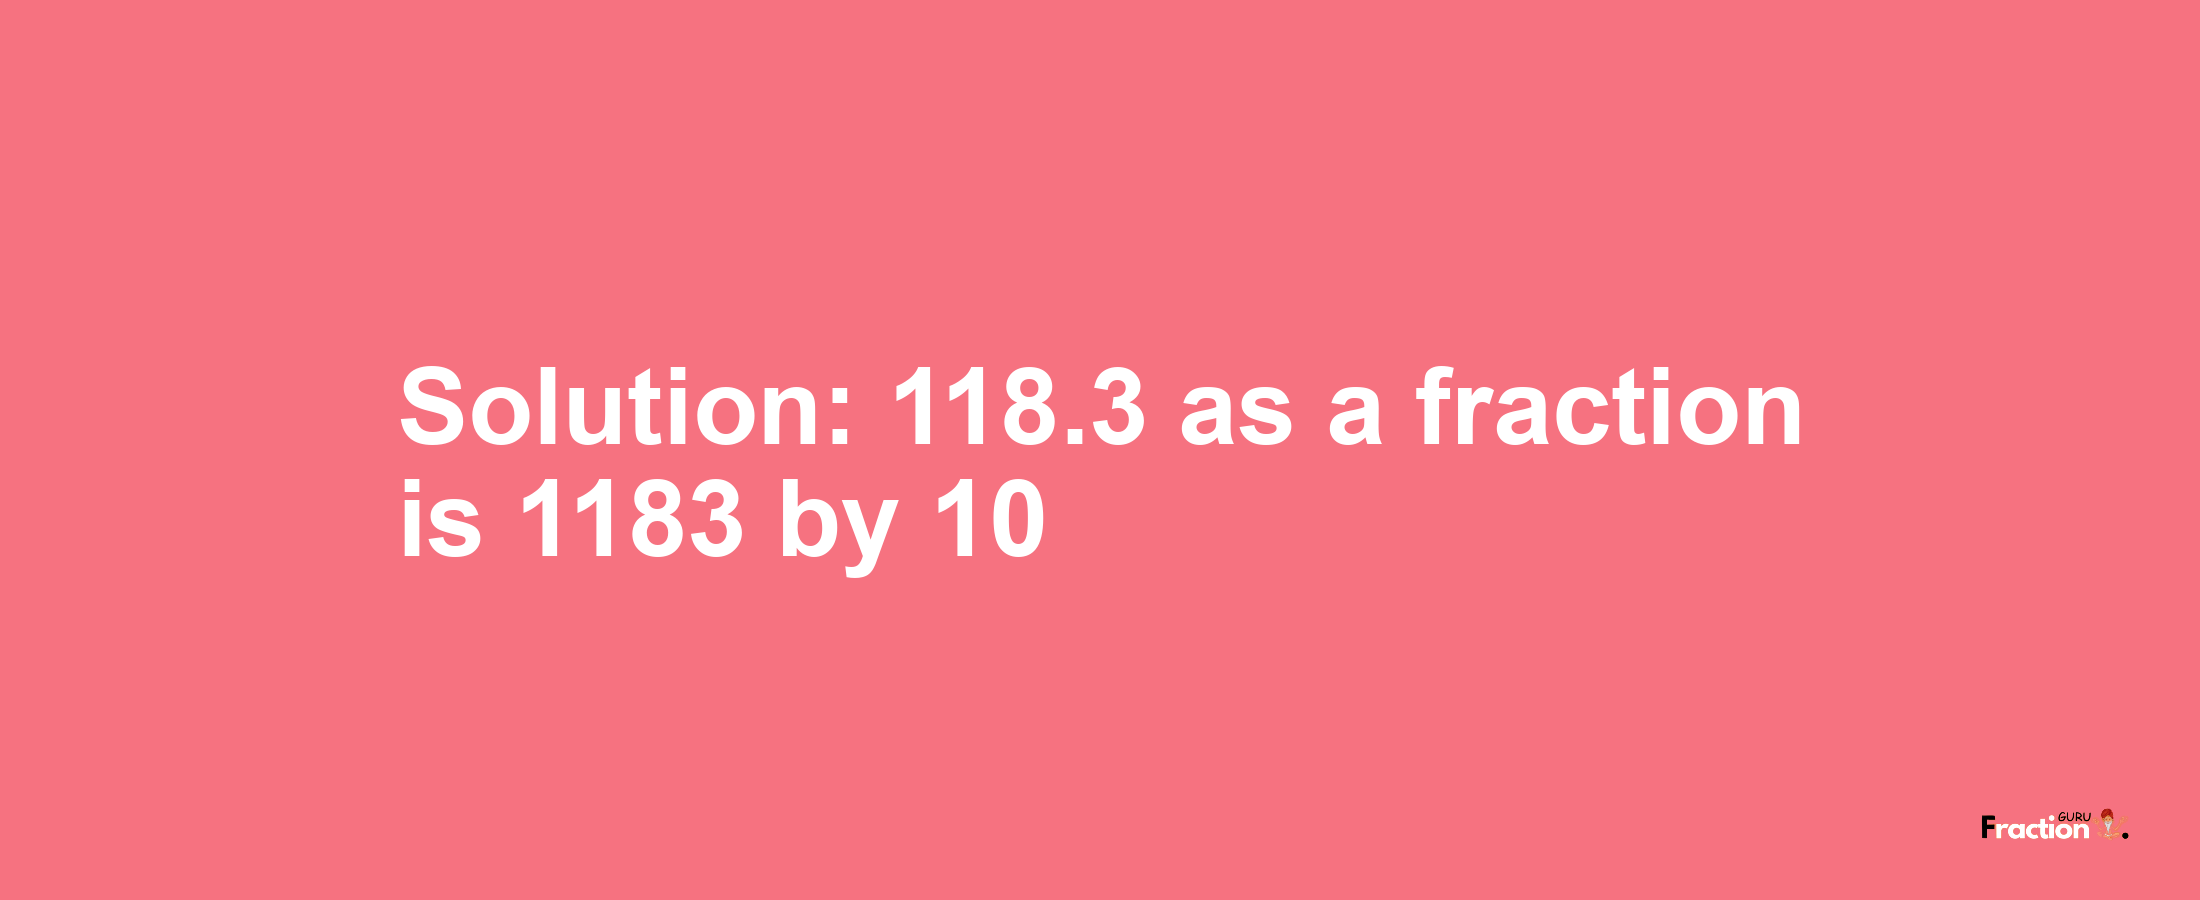 Solution:118.3 as a fraction is 1183/10